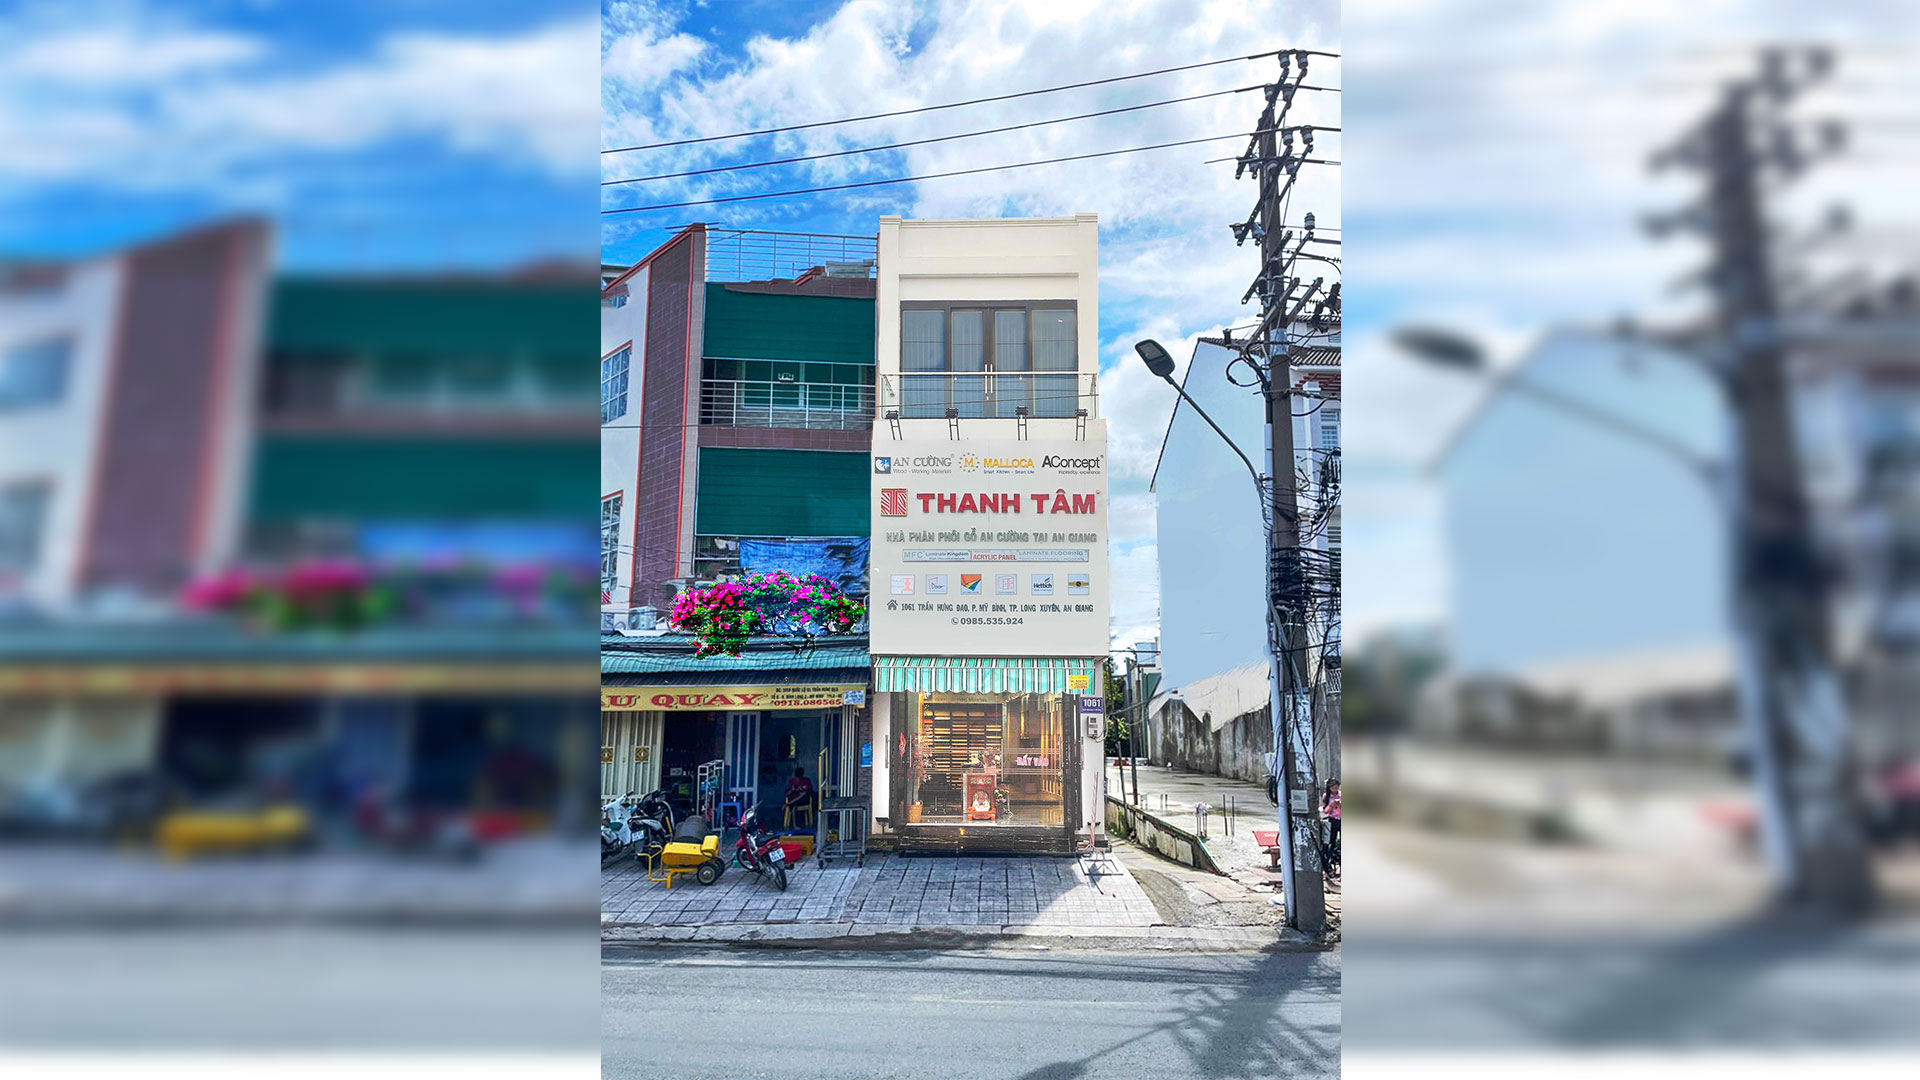 NGO THANH TAM INDUSTRIAL WOOD COMPANY LIMITED – AN GIANG